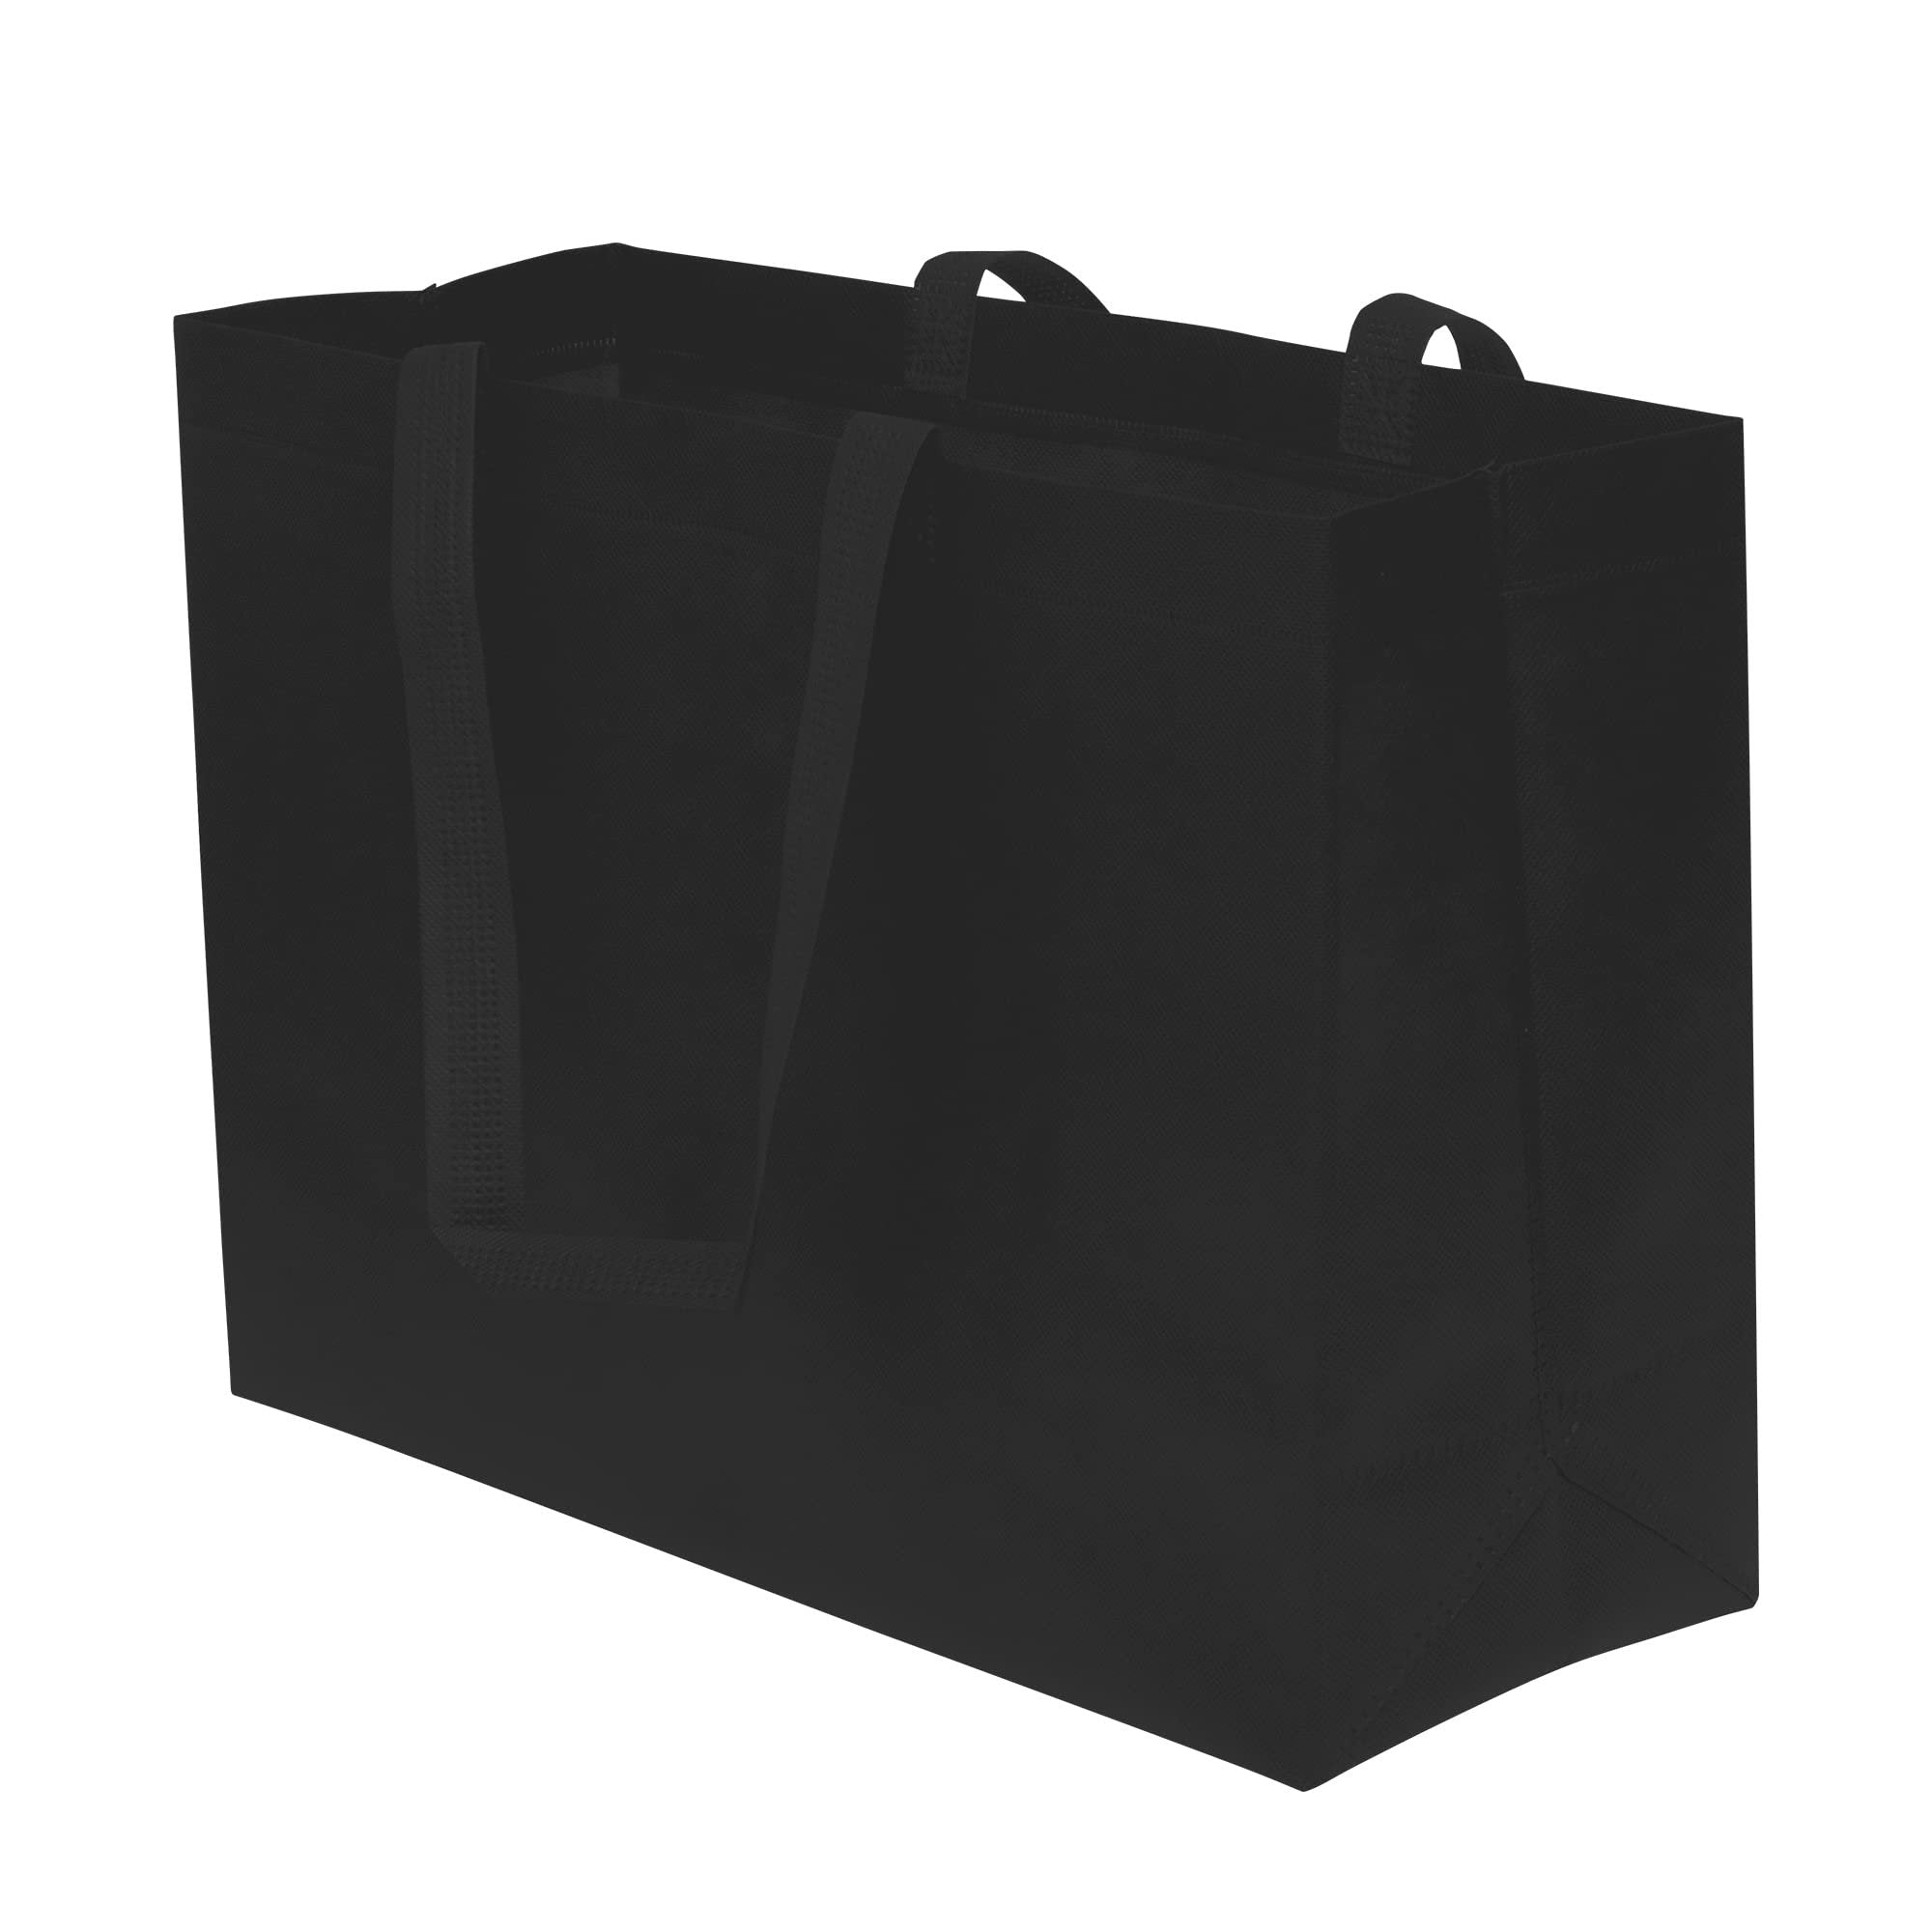 Large Reusable Gift Bags 16x6x12 - Eco Friendly Black Fabric Totes for Shopping, Events, Parties - 12 Pack